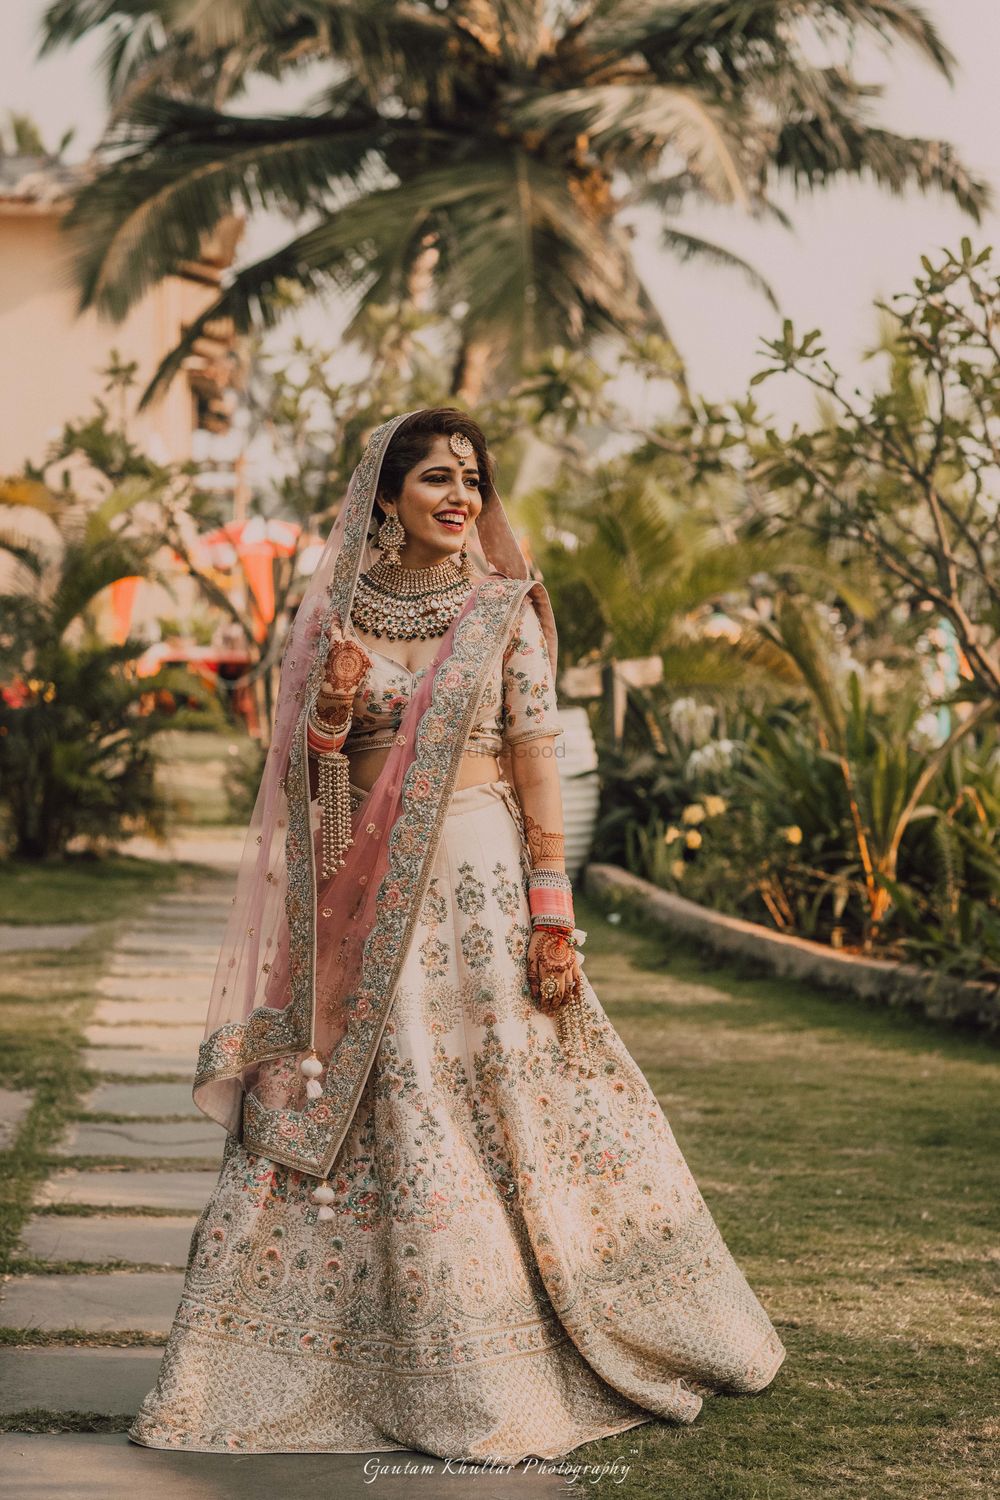 Photo of Bride in off white bridal lehenga with pink dupatta